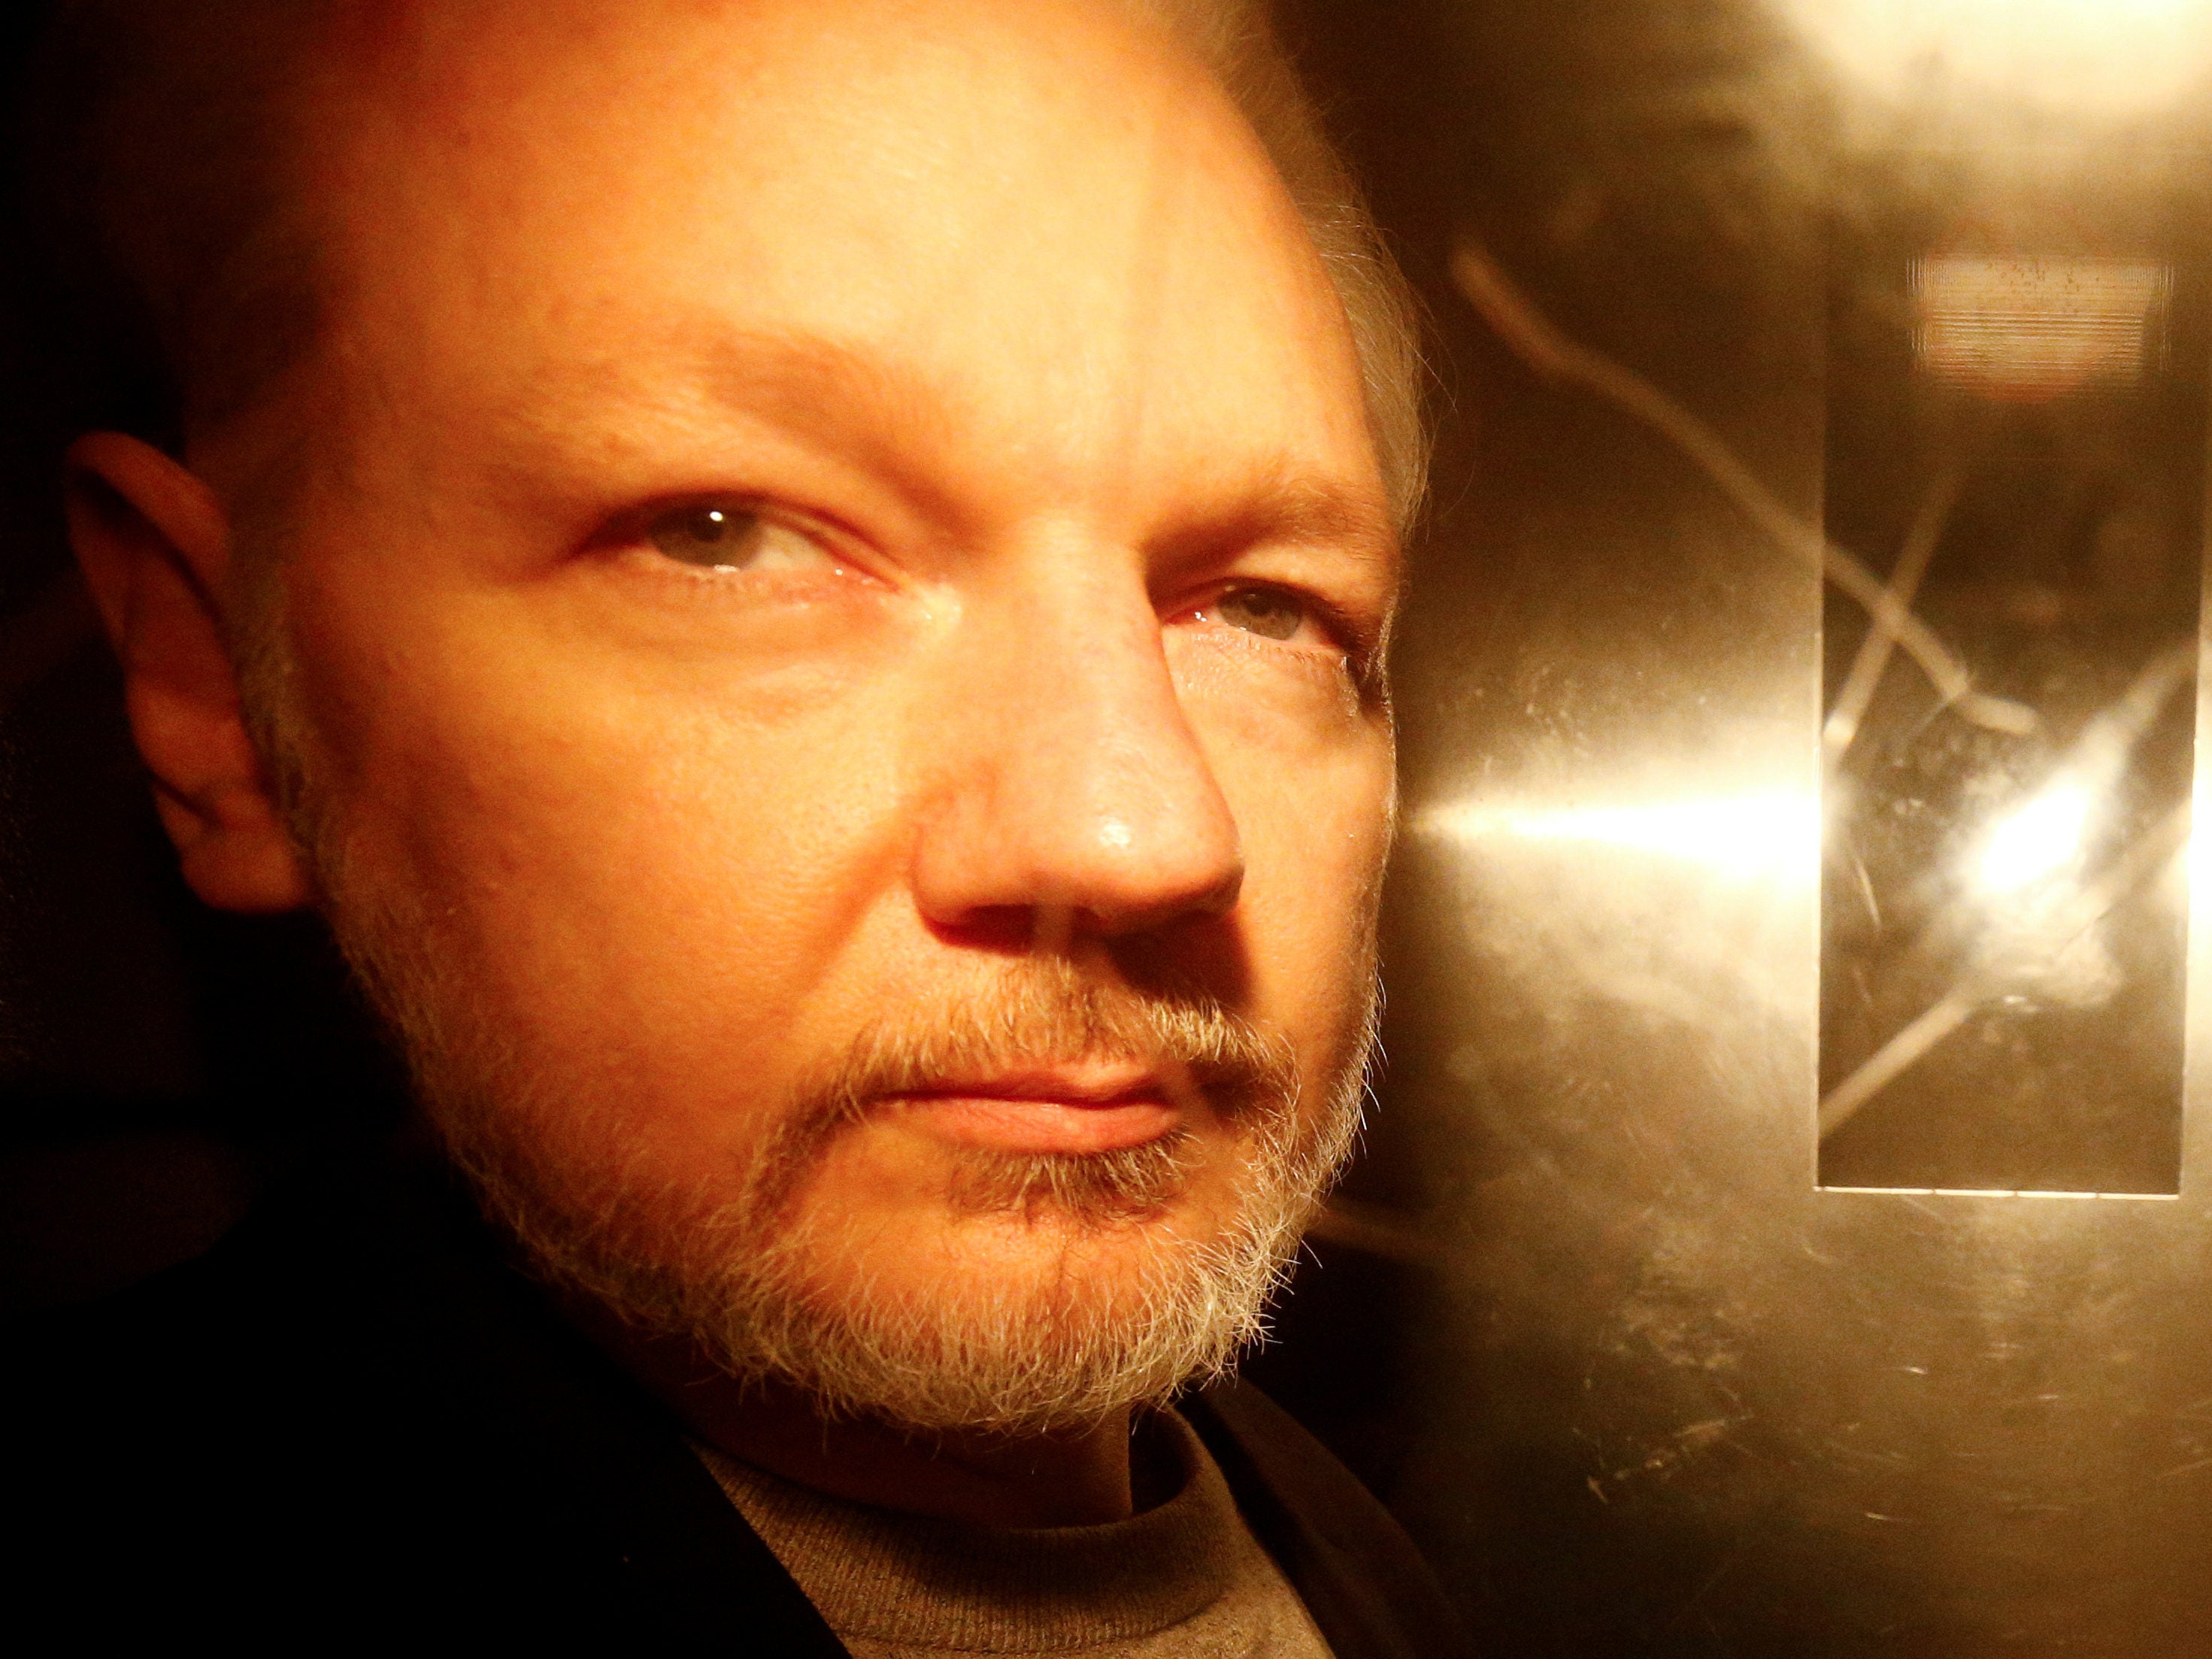 Judge sets January date for decision on Julian Assange US extradition